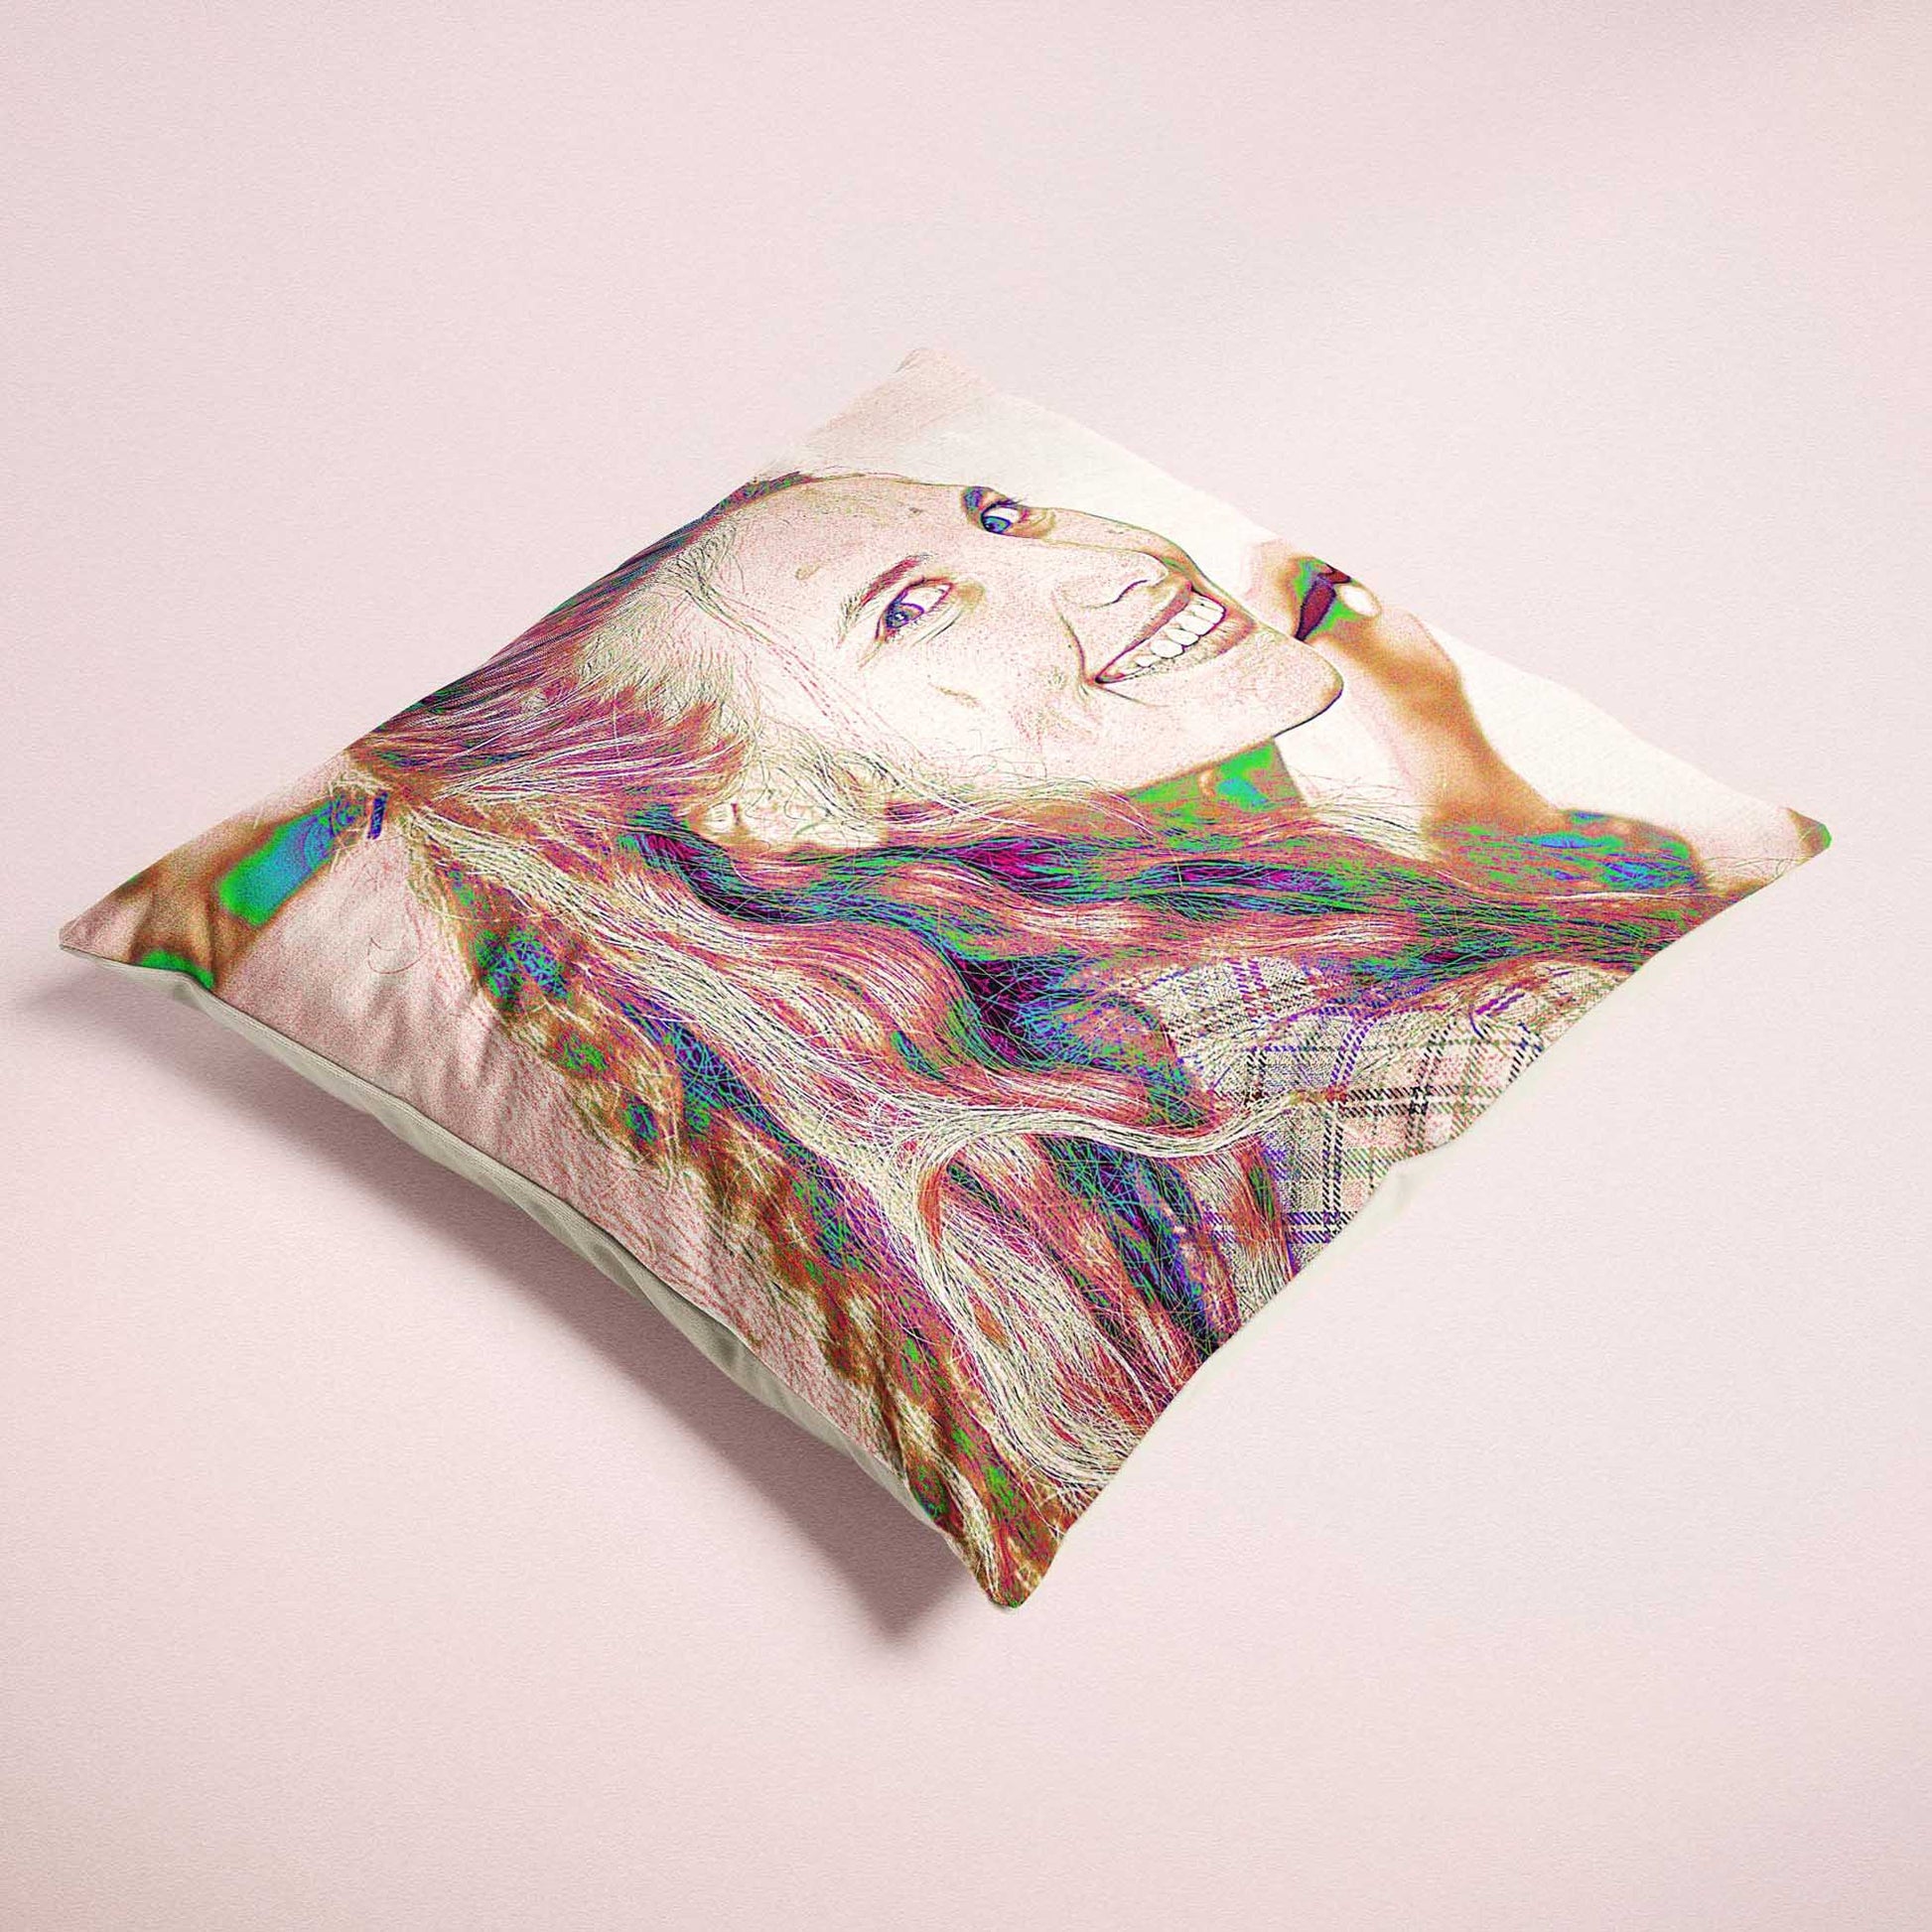 Indulge in the comforting embrace of the Personalised Pencil Drawing Cushion. Crafted from velvet fabric, its softness invites relaxation and adds a touch of luxury to your home decor. With a print from your photo, handmade cushion 